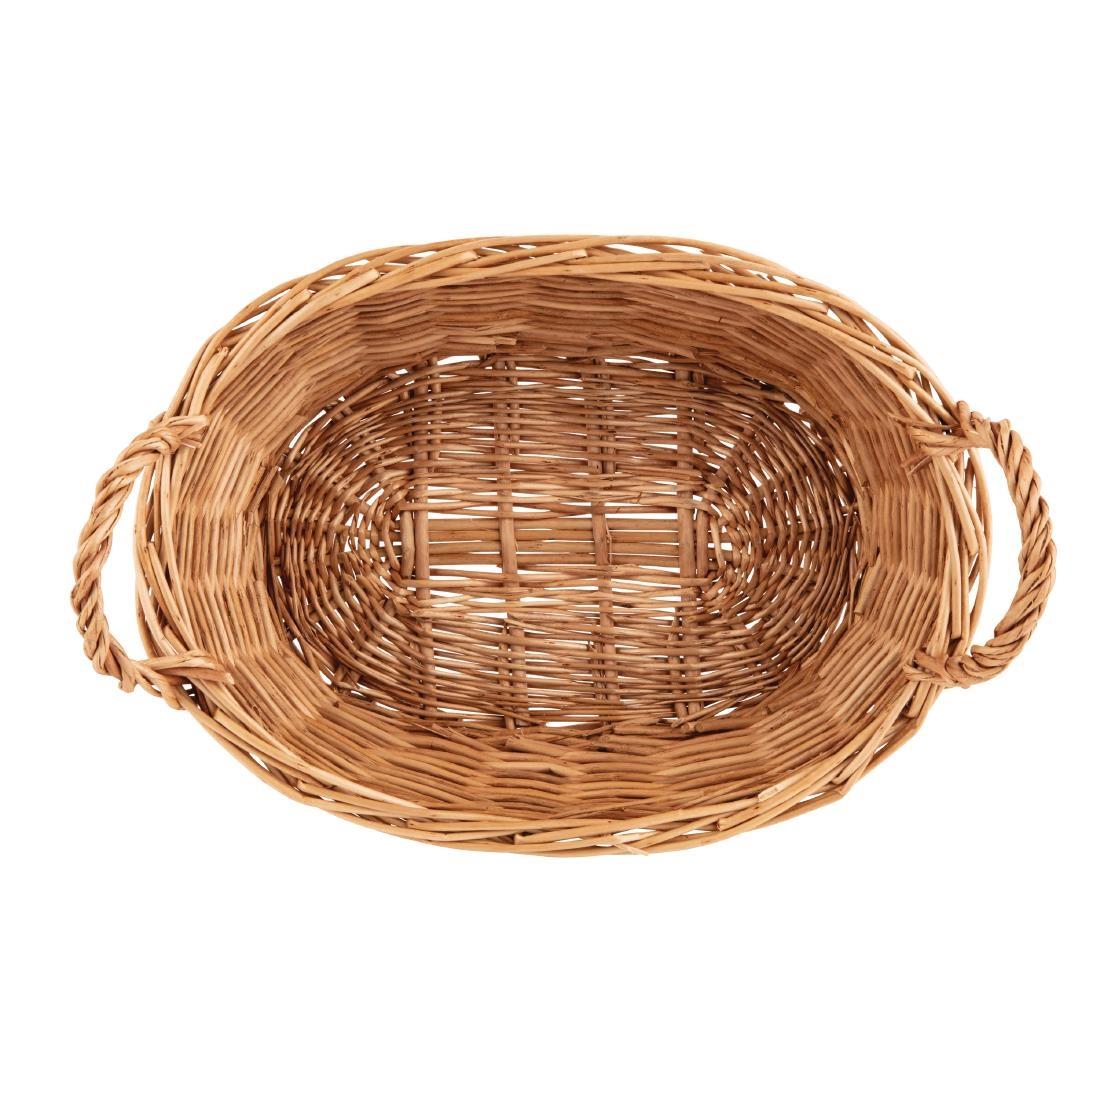 Willow Large Oval Table Basket - P763  - 3